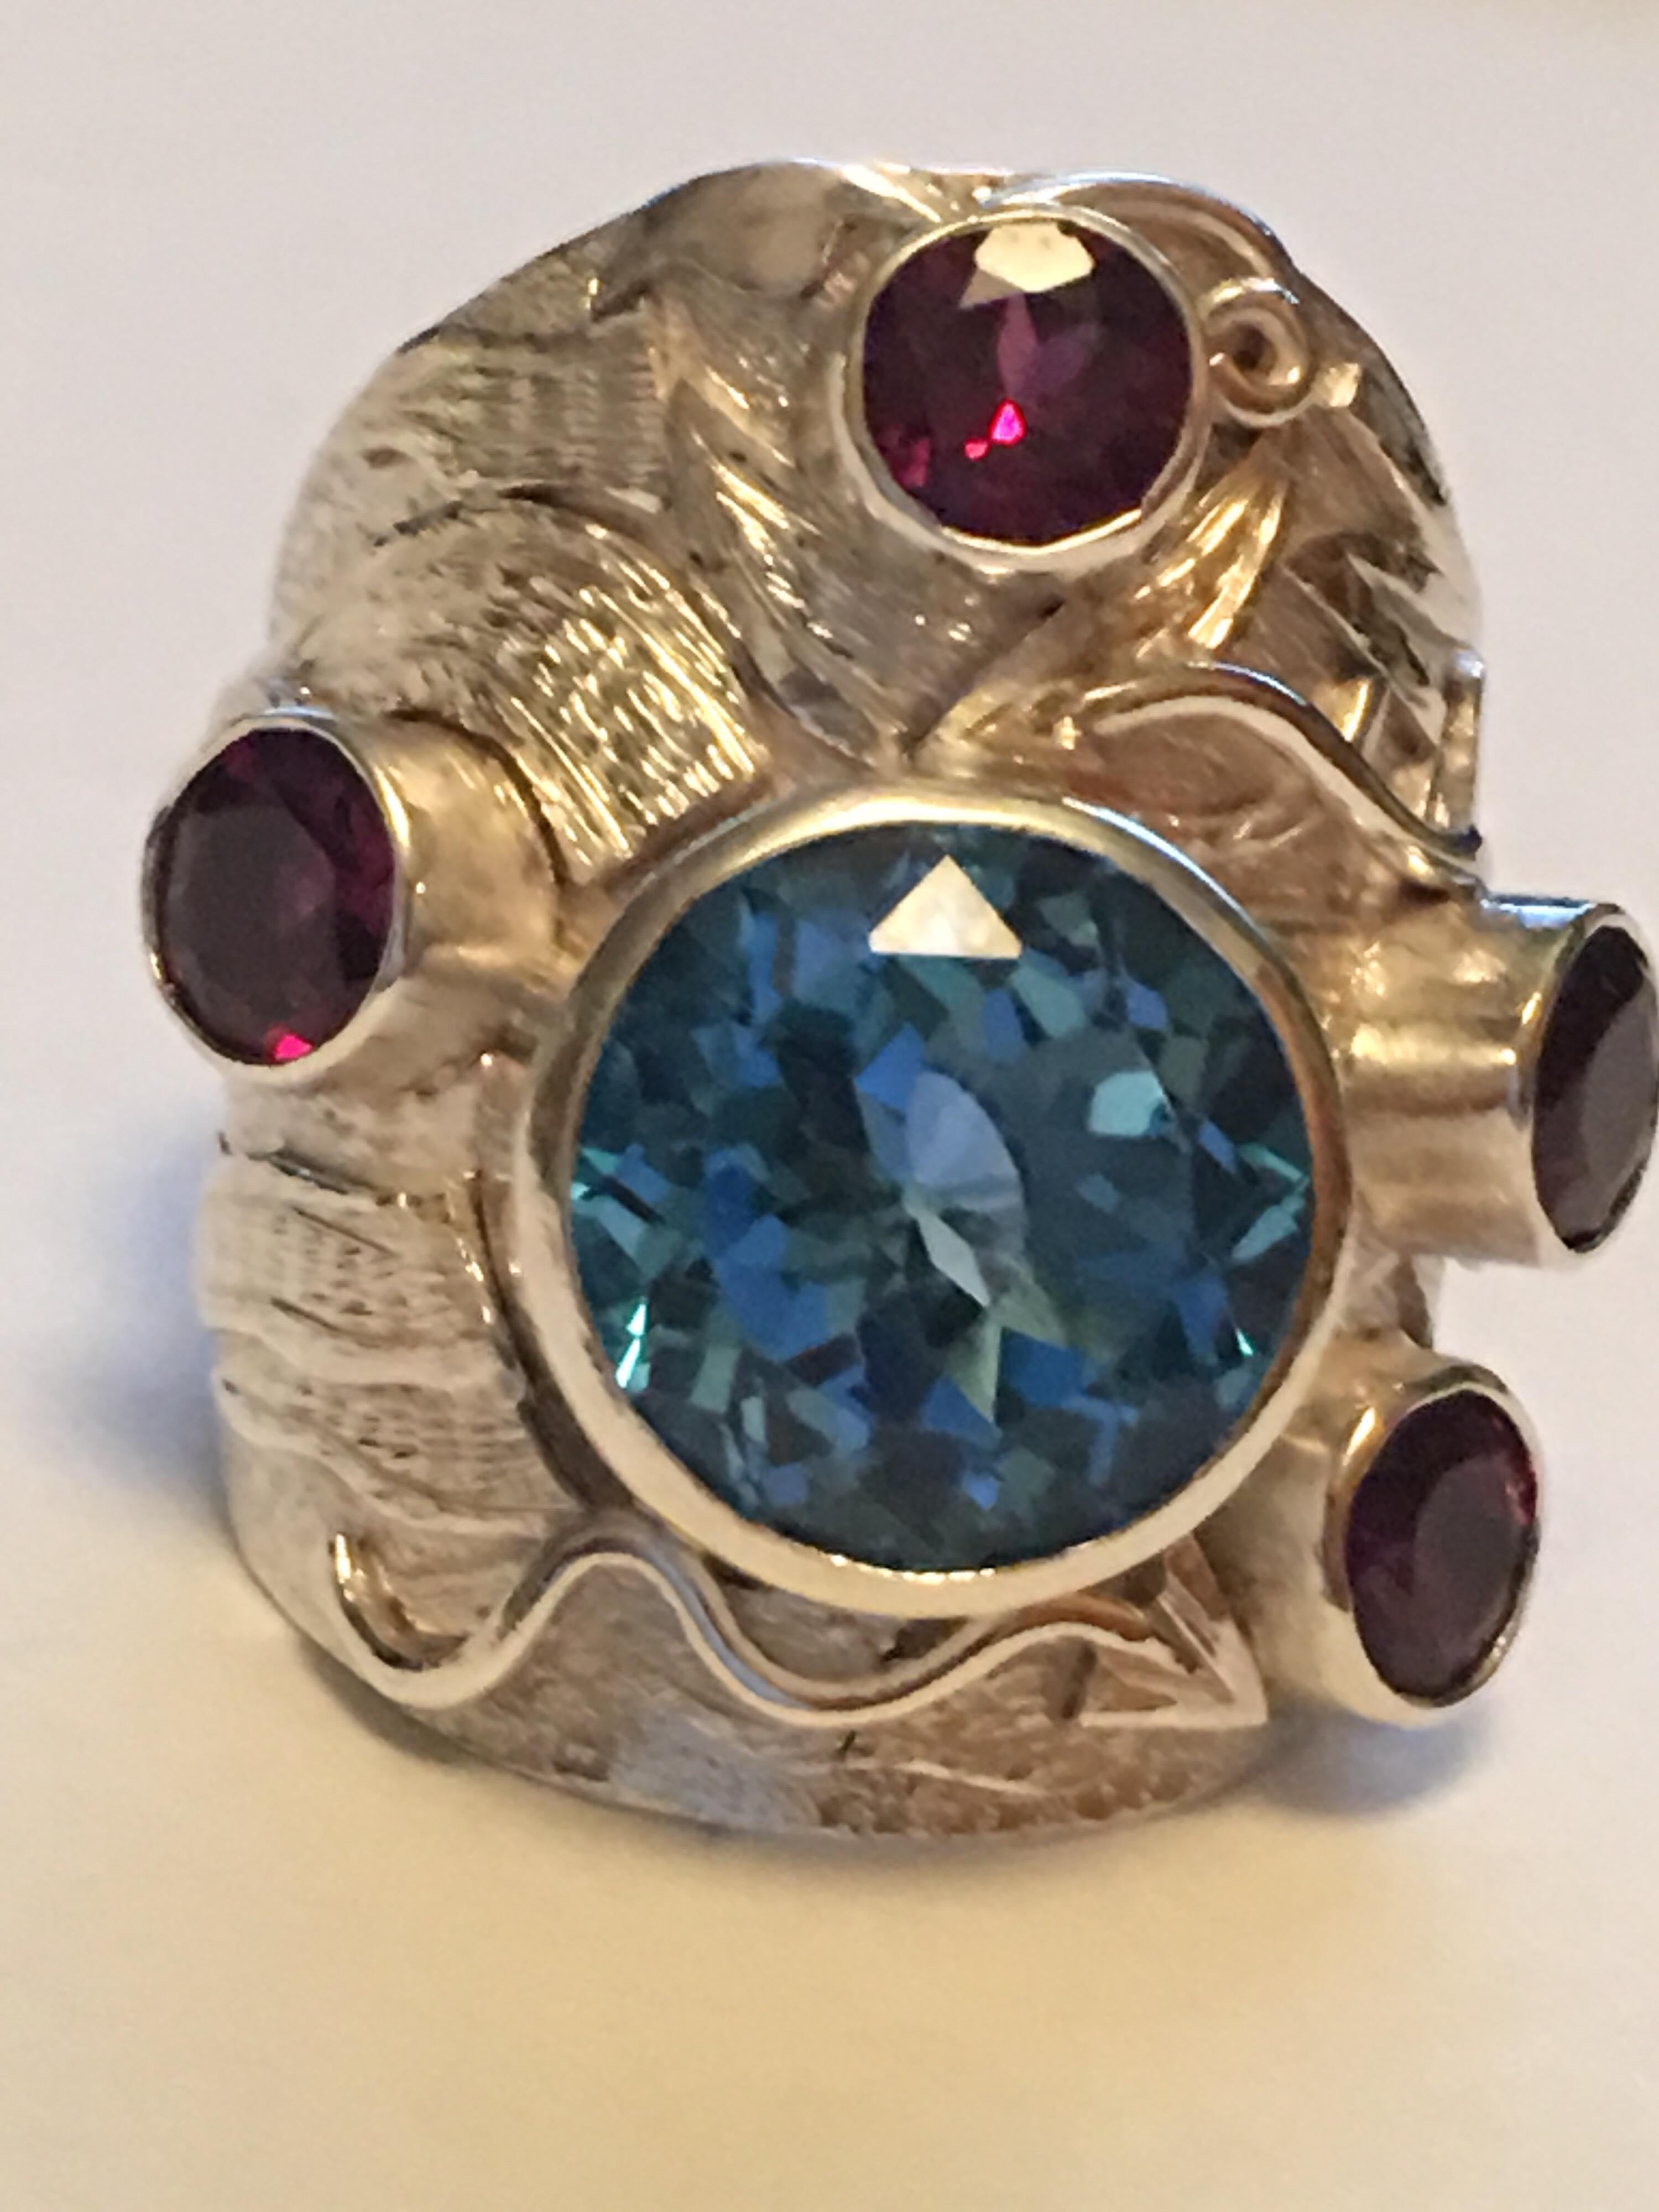 Round blue topaz 13 MM AND Round Garnet 5 MM Set in sterling silver is hand crafted ring,
This one of a kind Ring is master piece work .
All the stones are hand cut and polished. 
The ring is size 9 , If needed you can resize it.
